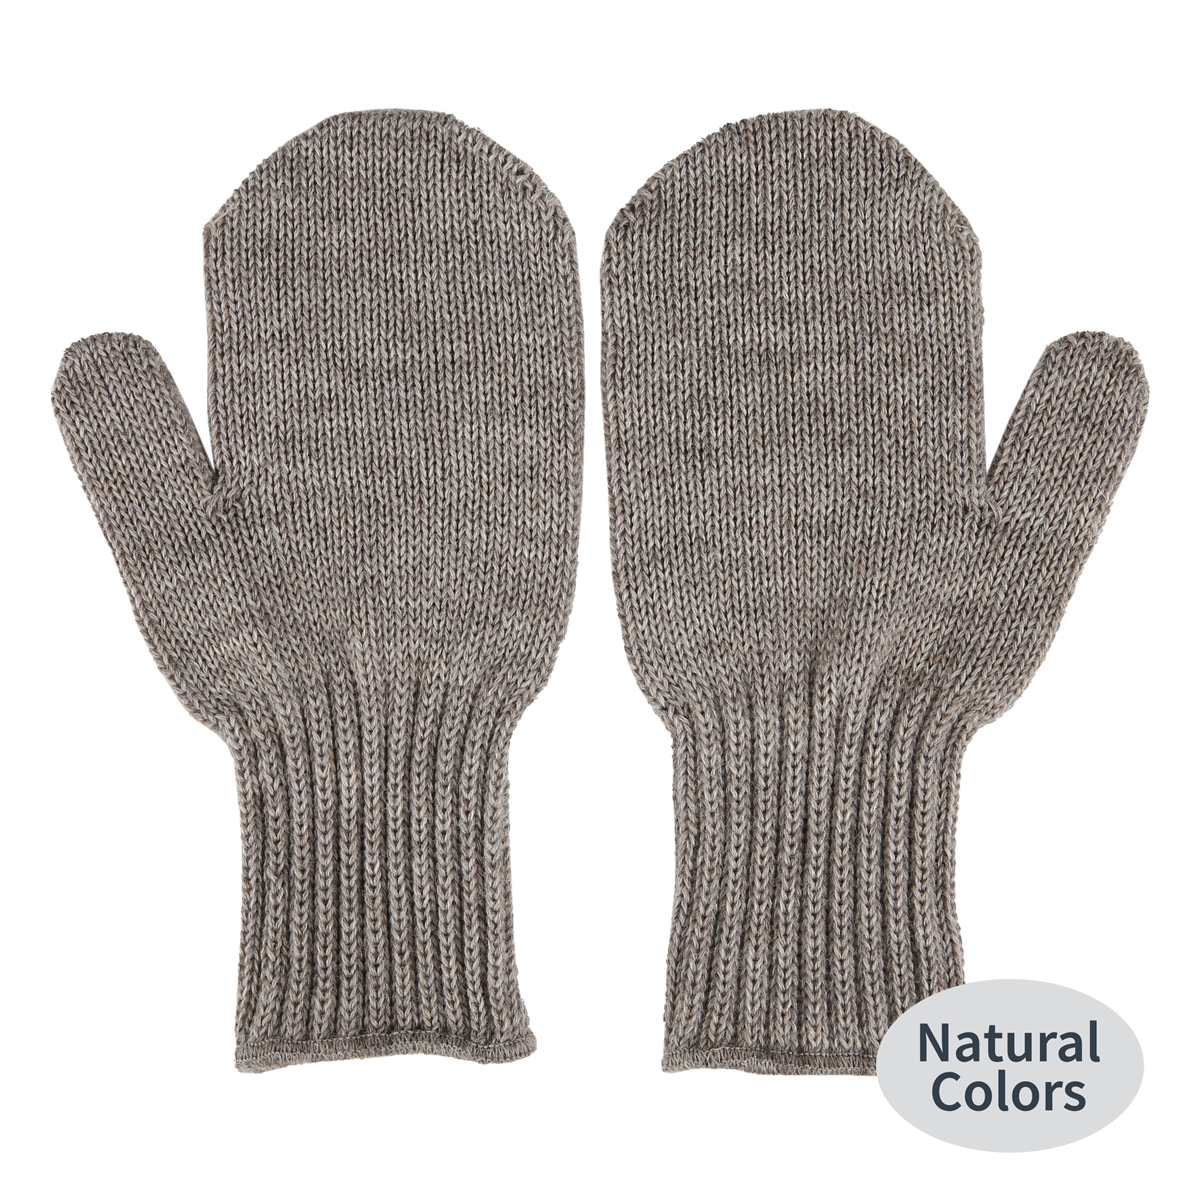 Wool mittens for adults